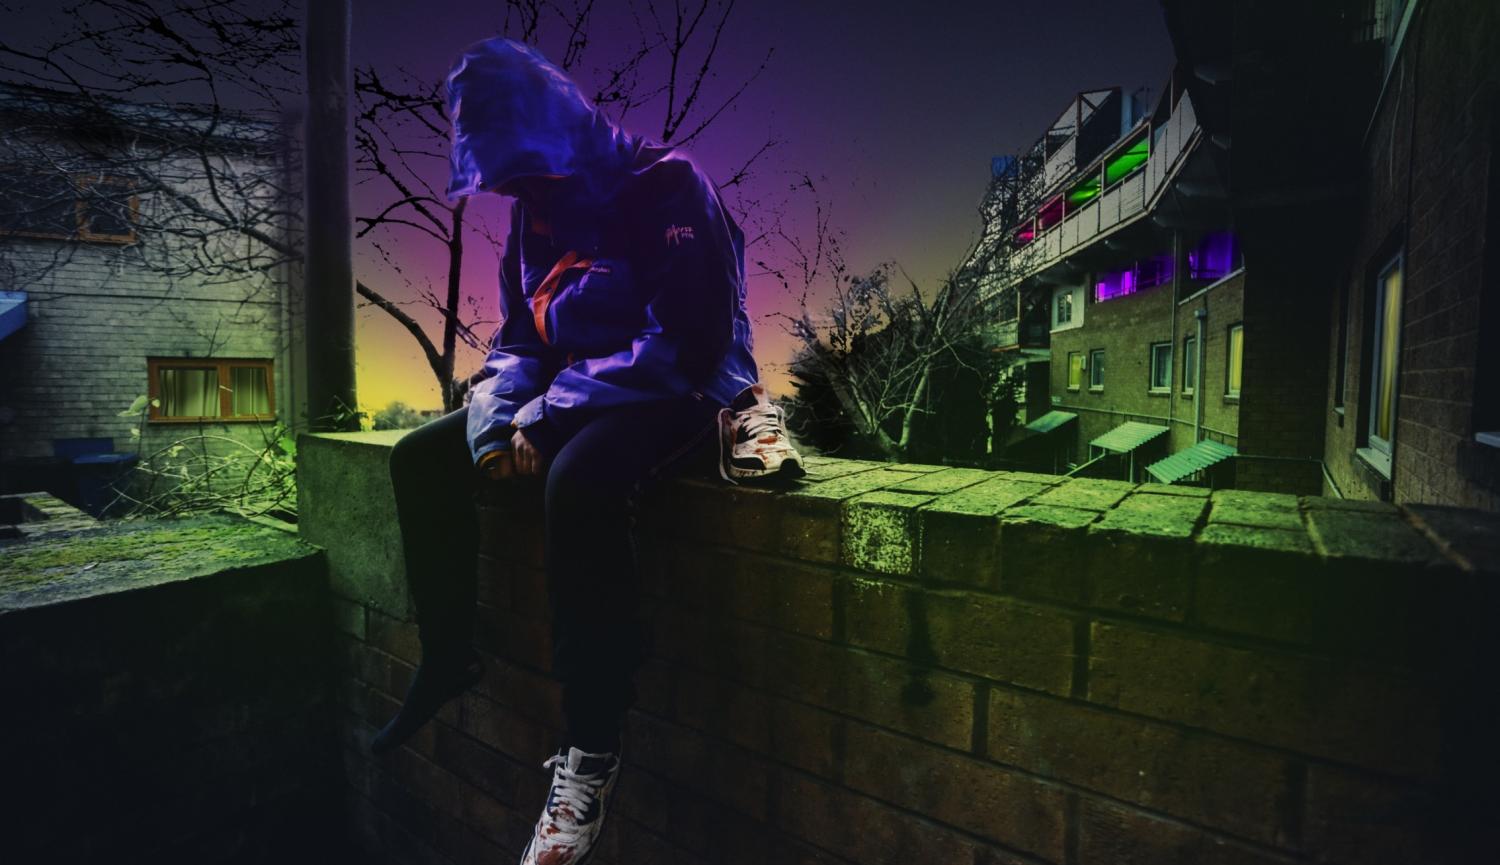 A young man sits on a wall at night wearing a hoodie, with a bloodied trainer next to him